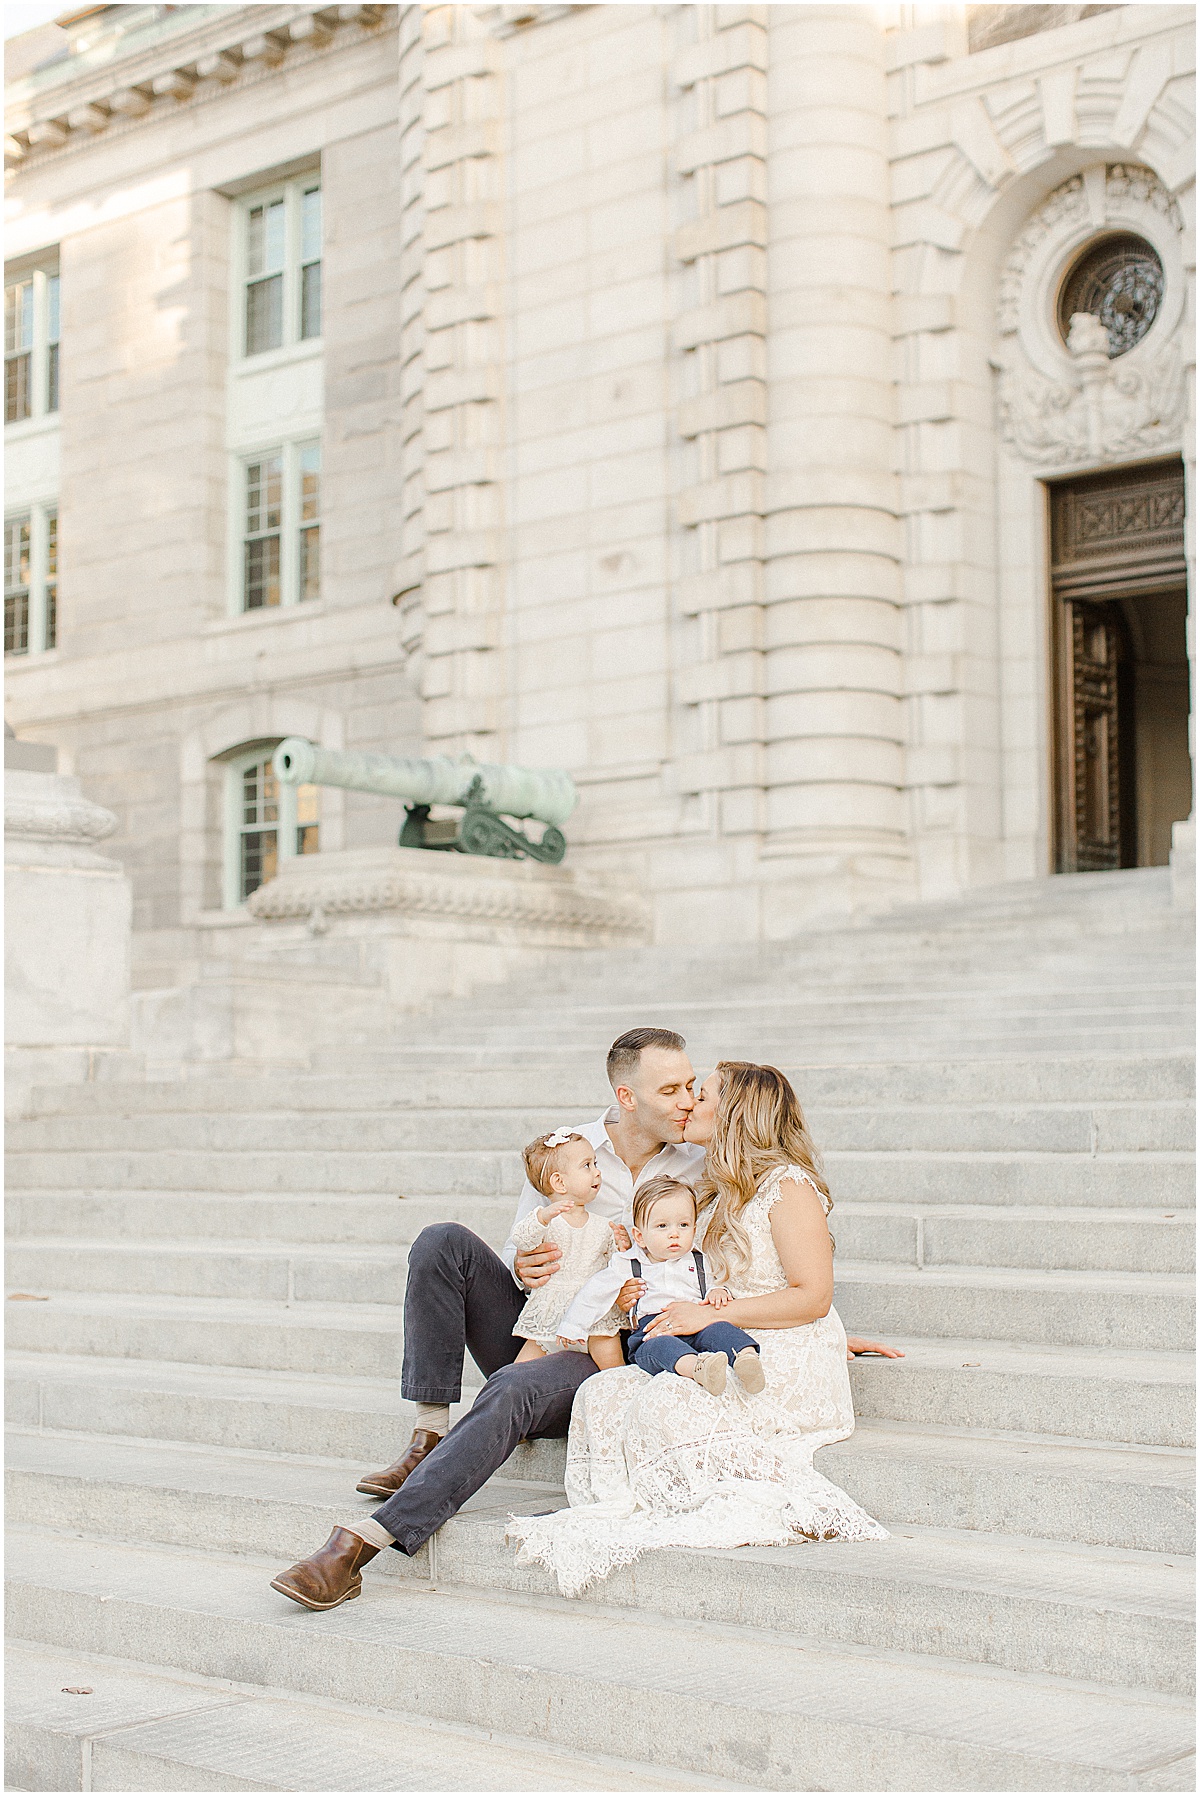 Mom and Dad kissing while holding their children on the steps of a U.S. Naval Academy building in downtown Annapolis Maryland